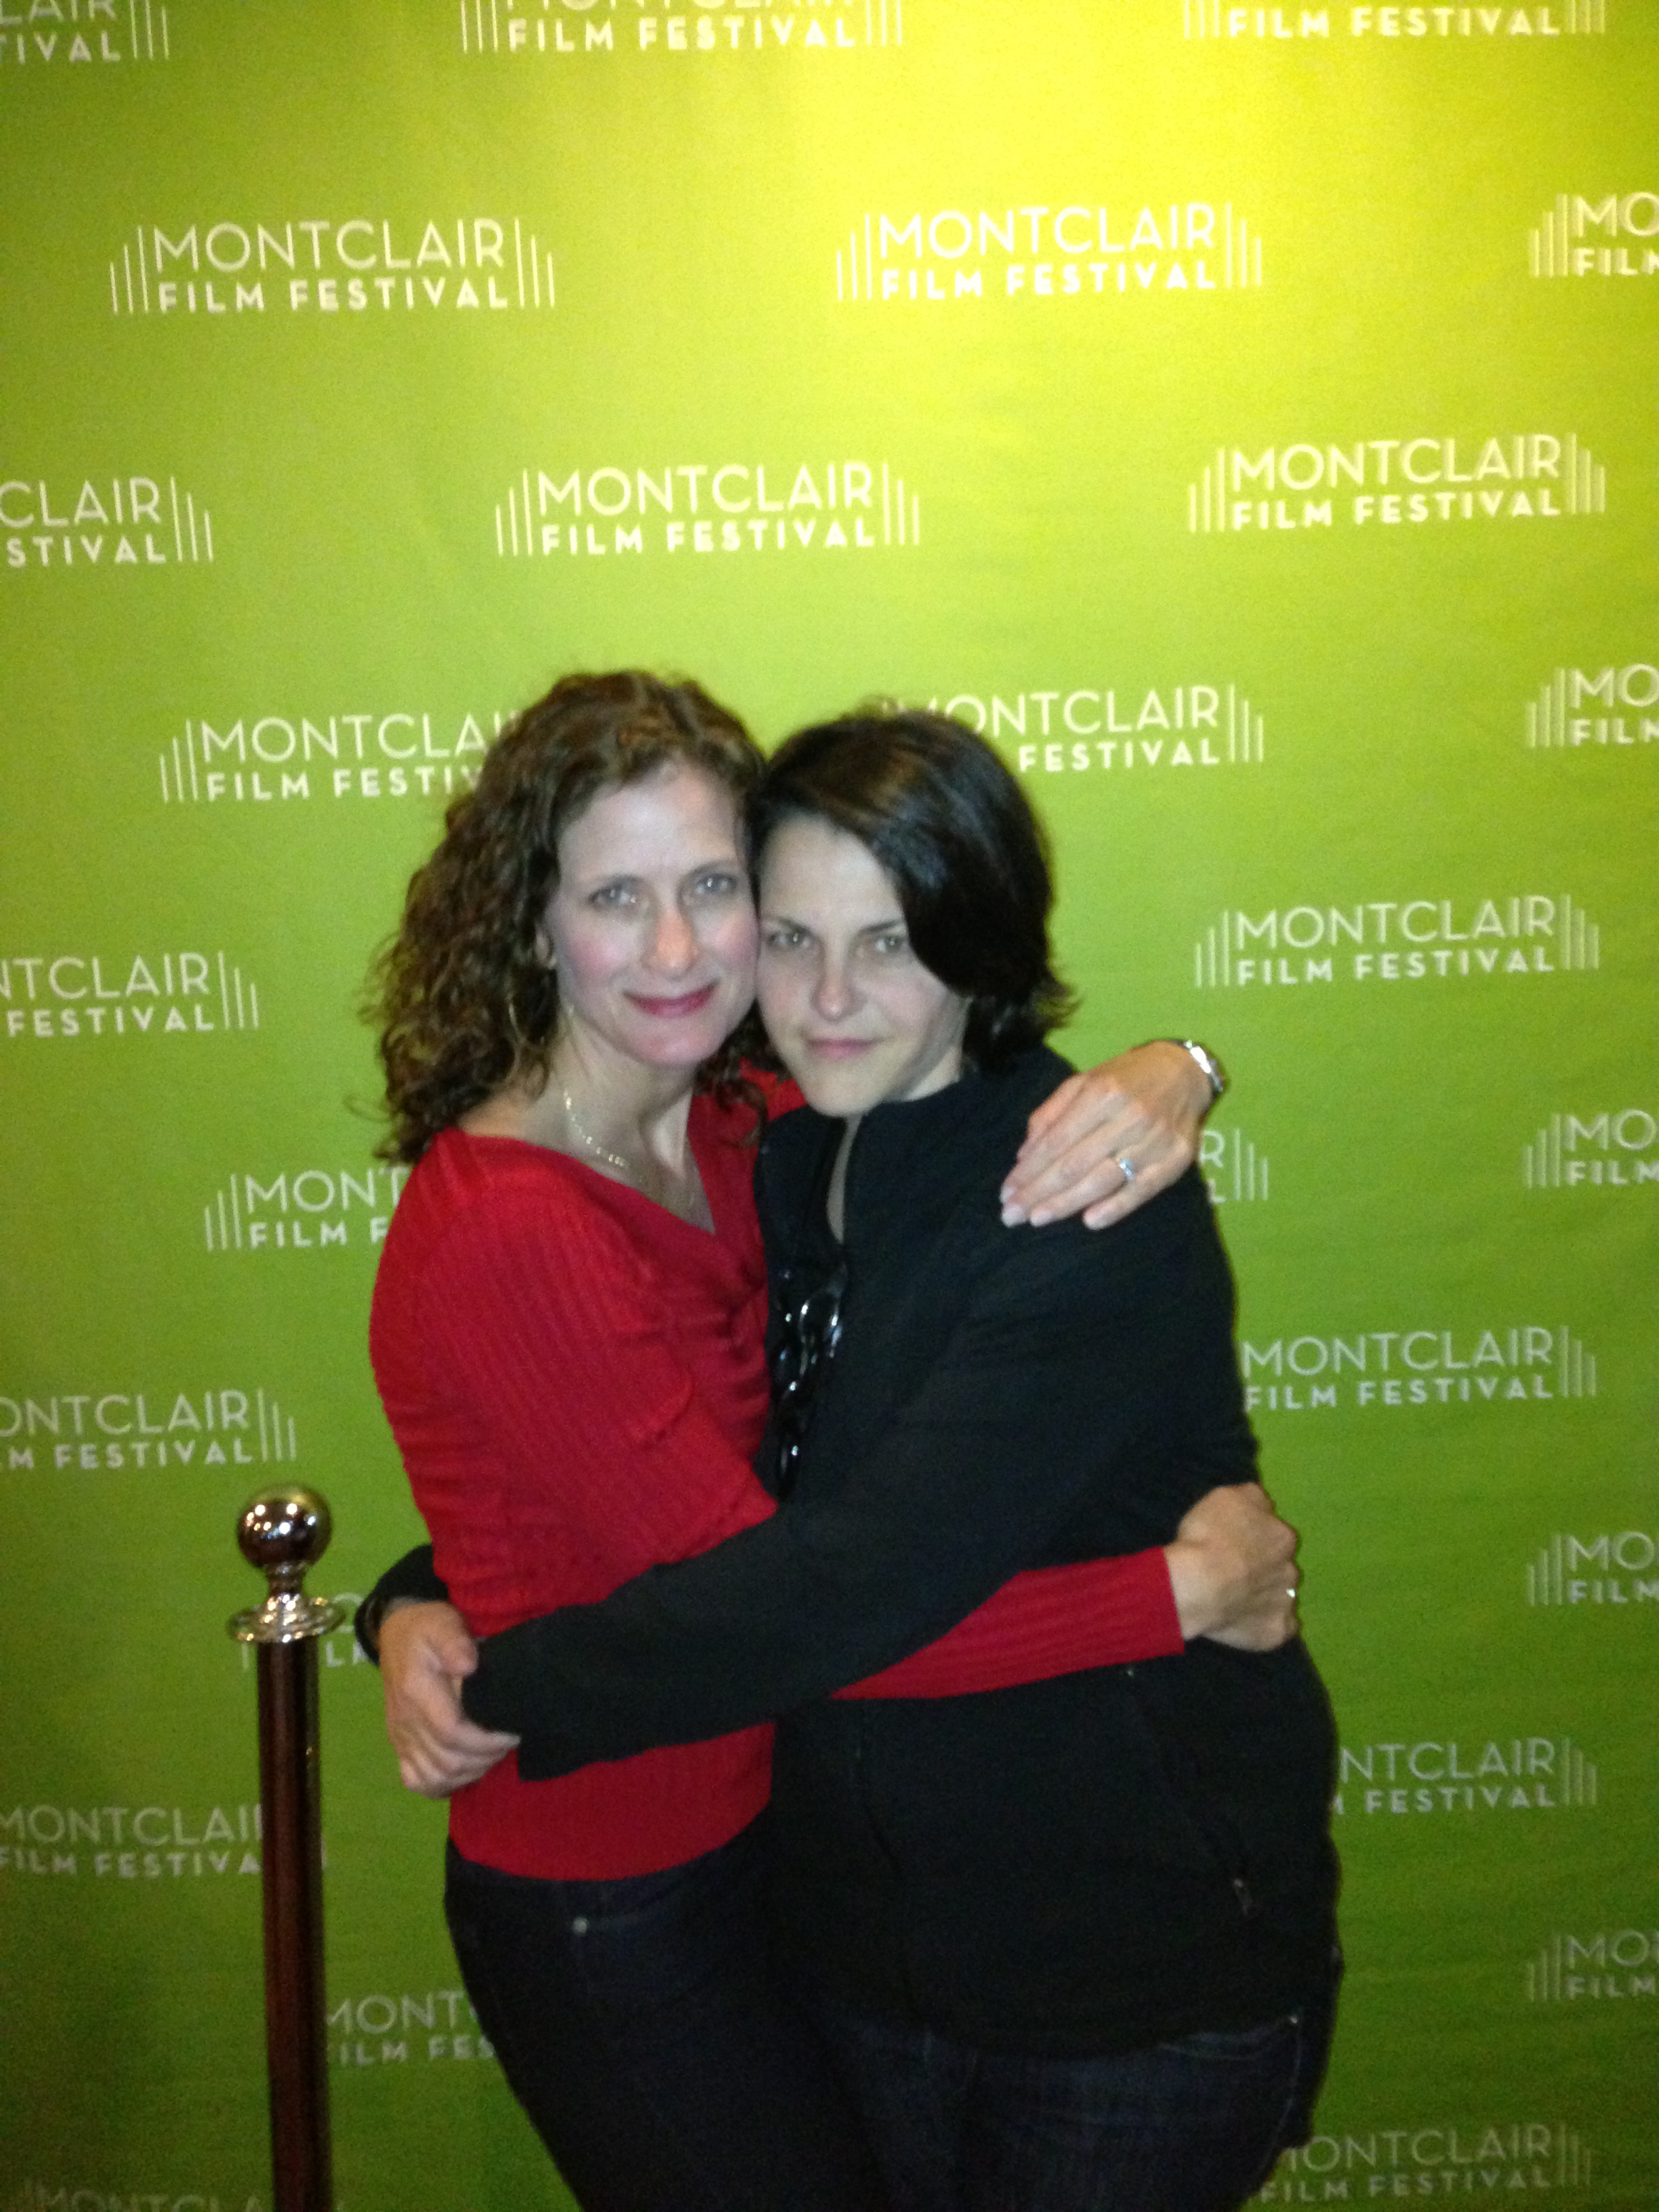 Montclair Film Festival - Closing Night - CONCUSSION Julie Fain Lawrence and Stacie Passon